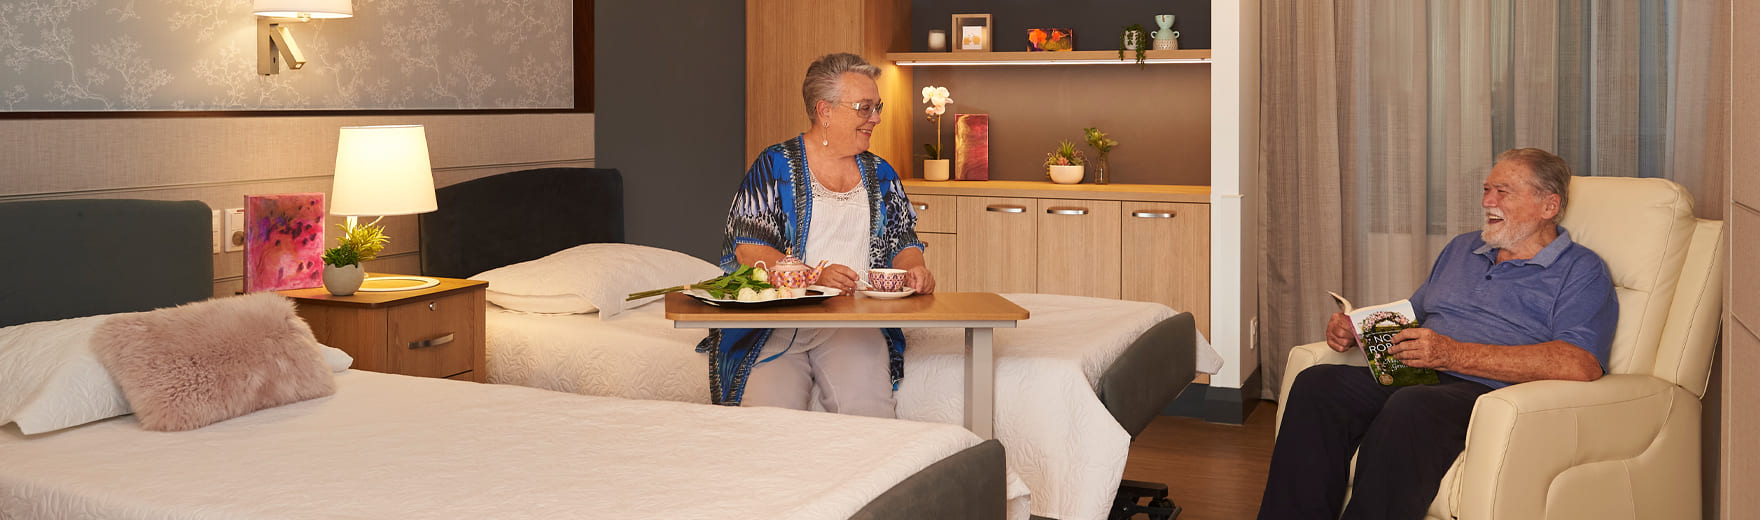 Residential Aged Care Services